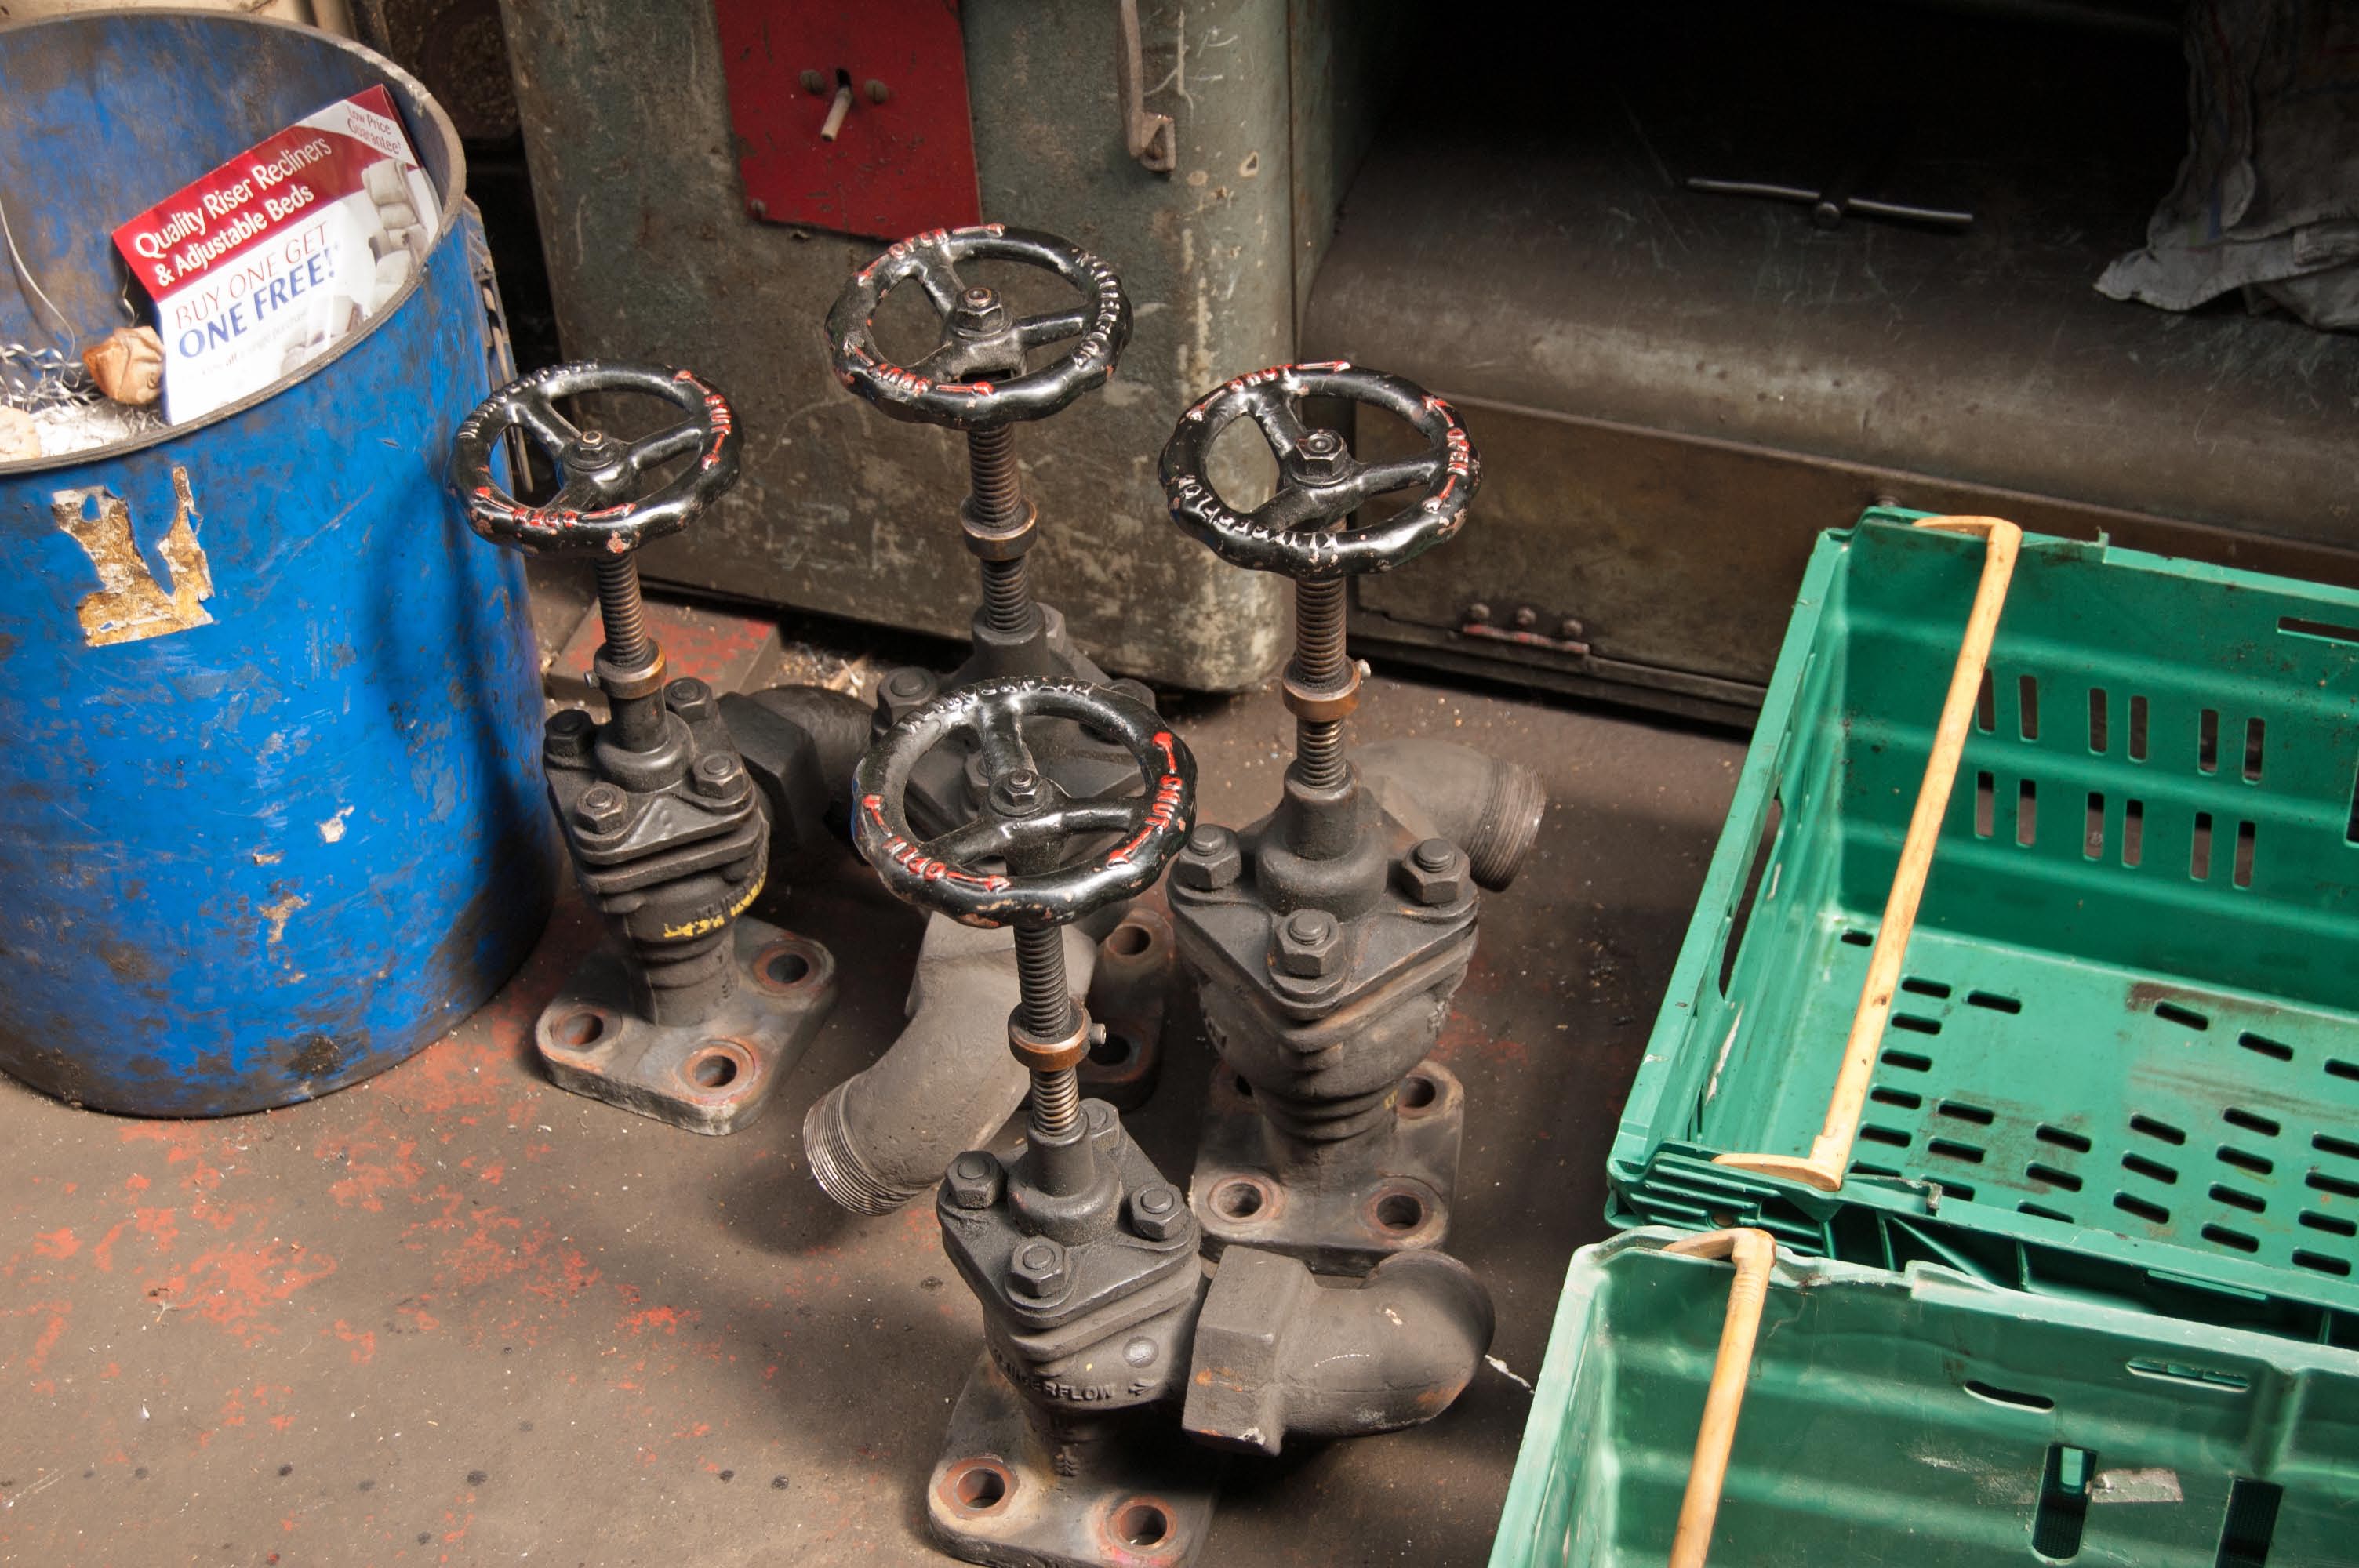 The four Klinger valves, from the steam manifold, before they are dismantled